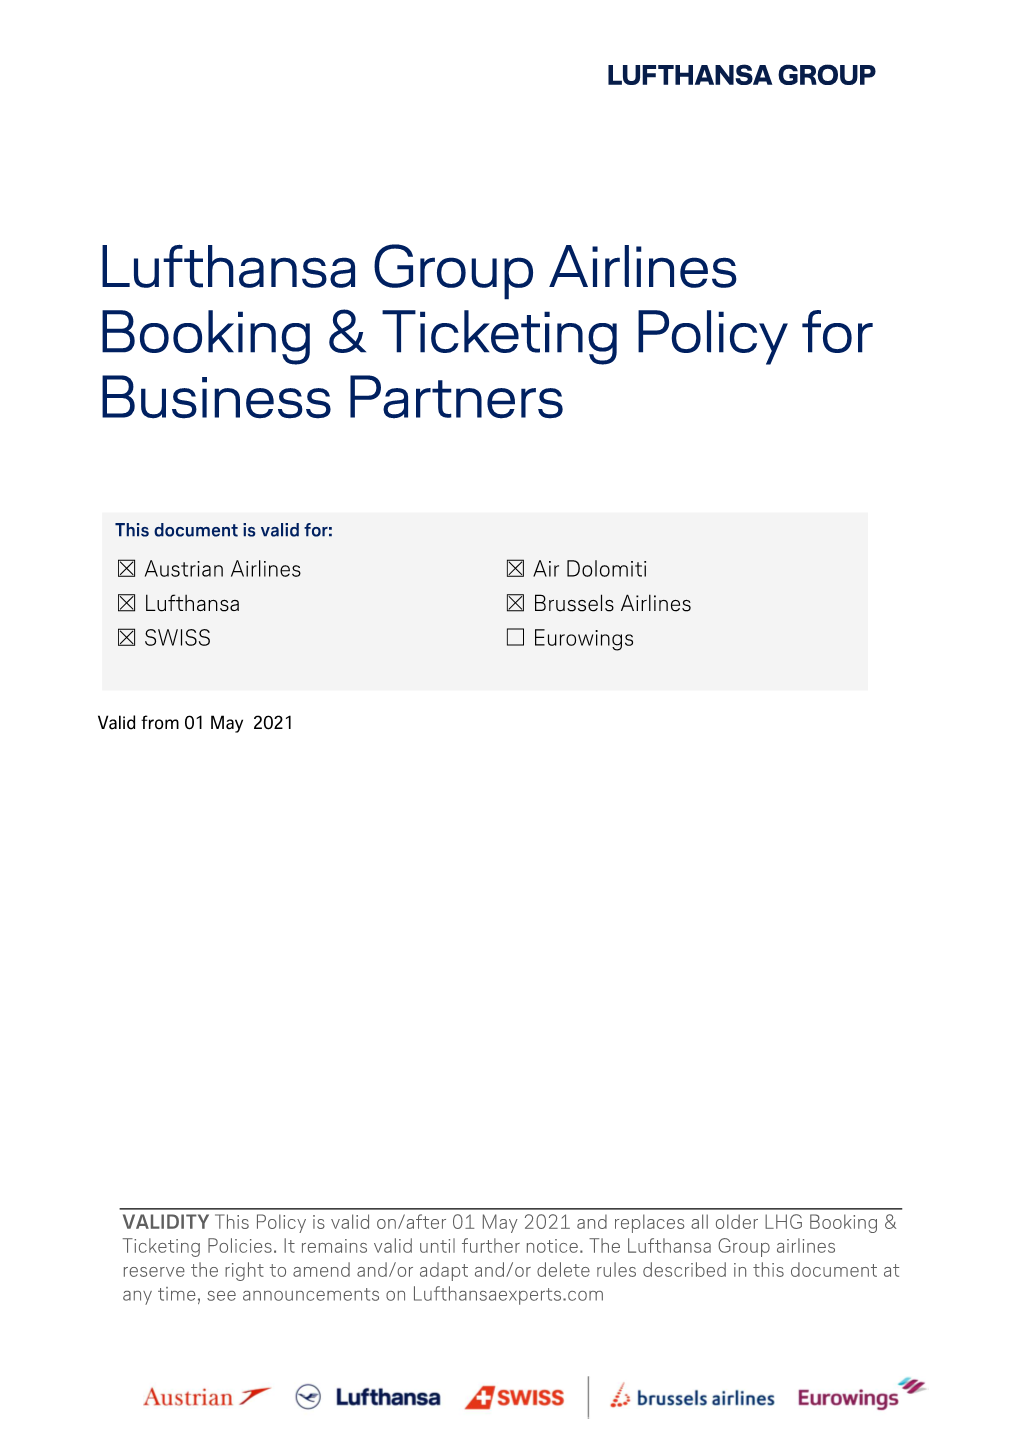 LUFTHANSA GROUP Booking and Ticketing Policy for Business Partners, V